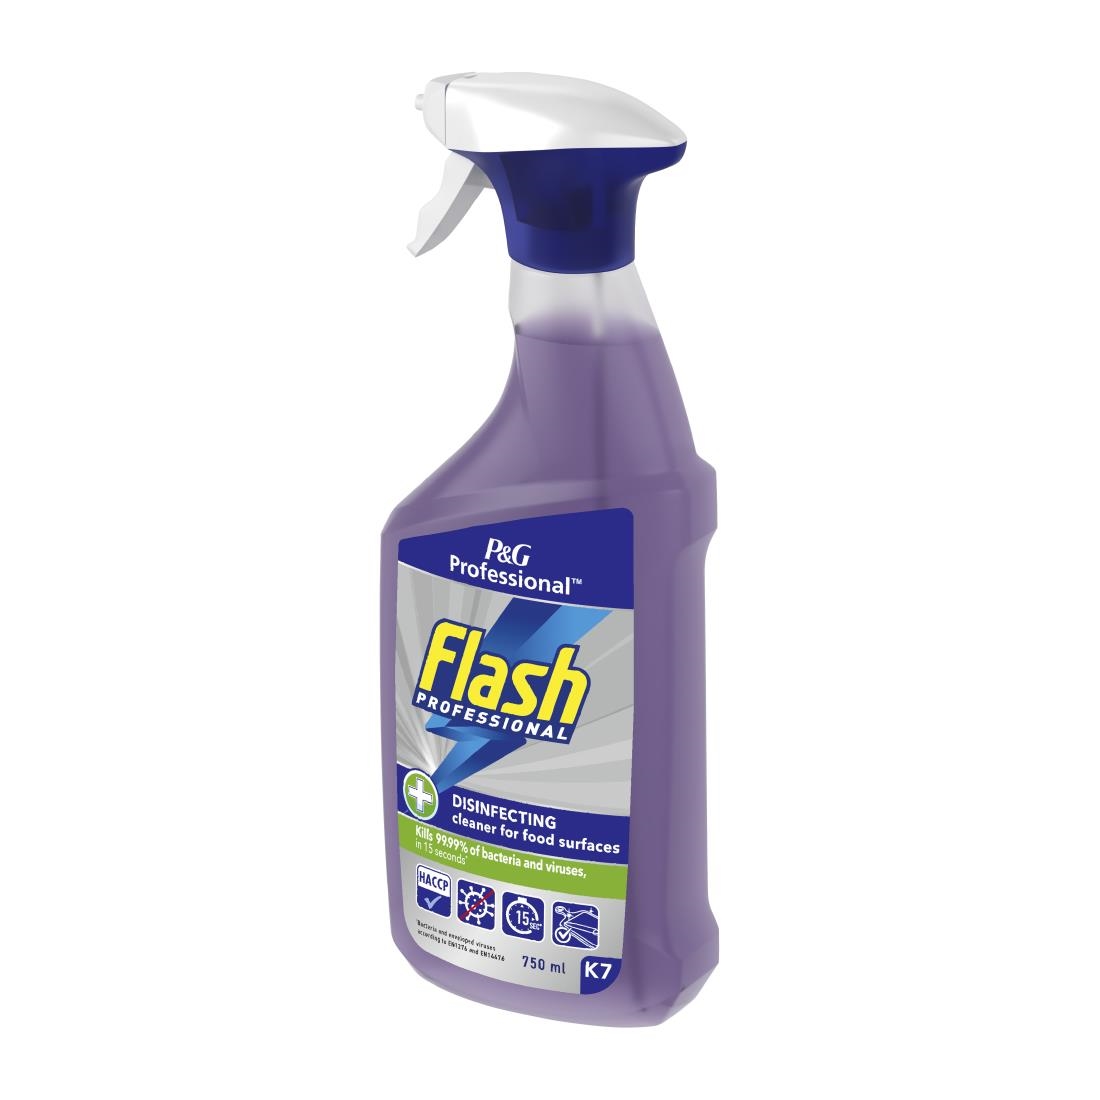 Flash Professional Disinfecting Cleaning Spray for Food Surfaces 750ml Pack of 6 (DX563)